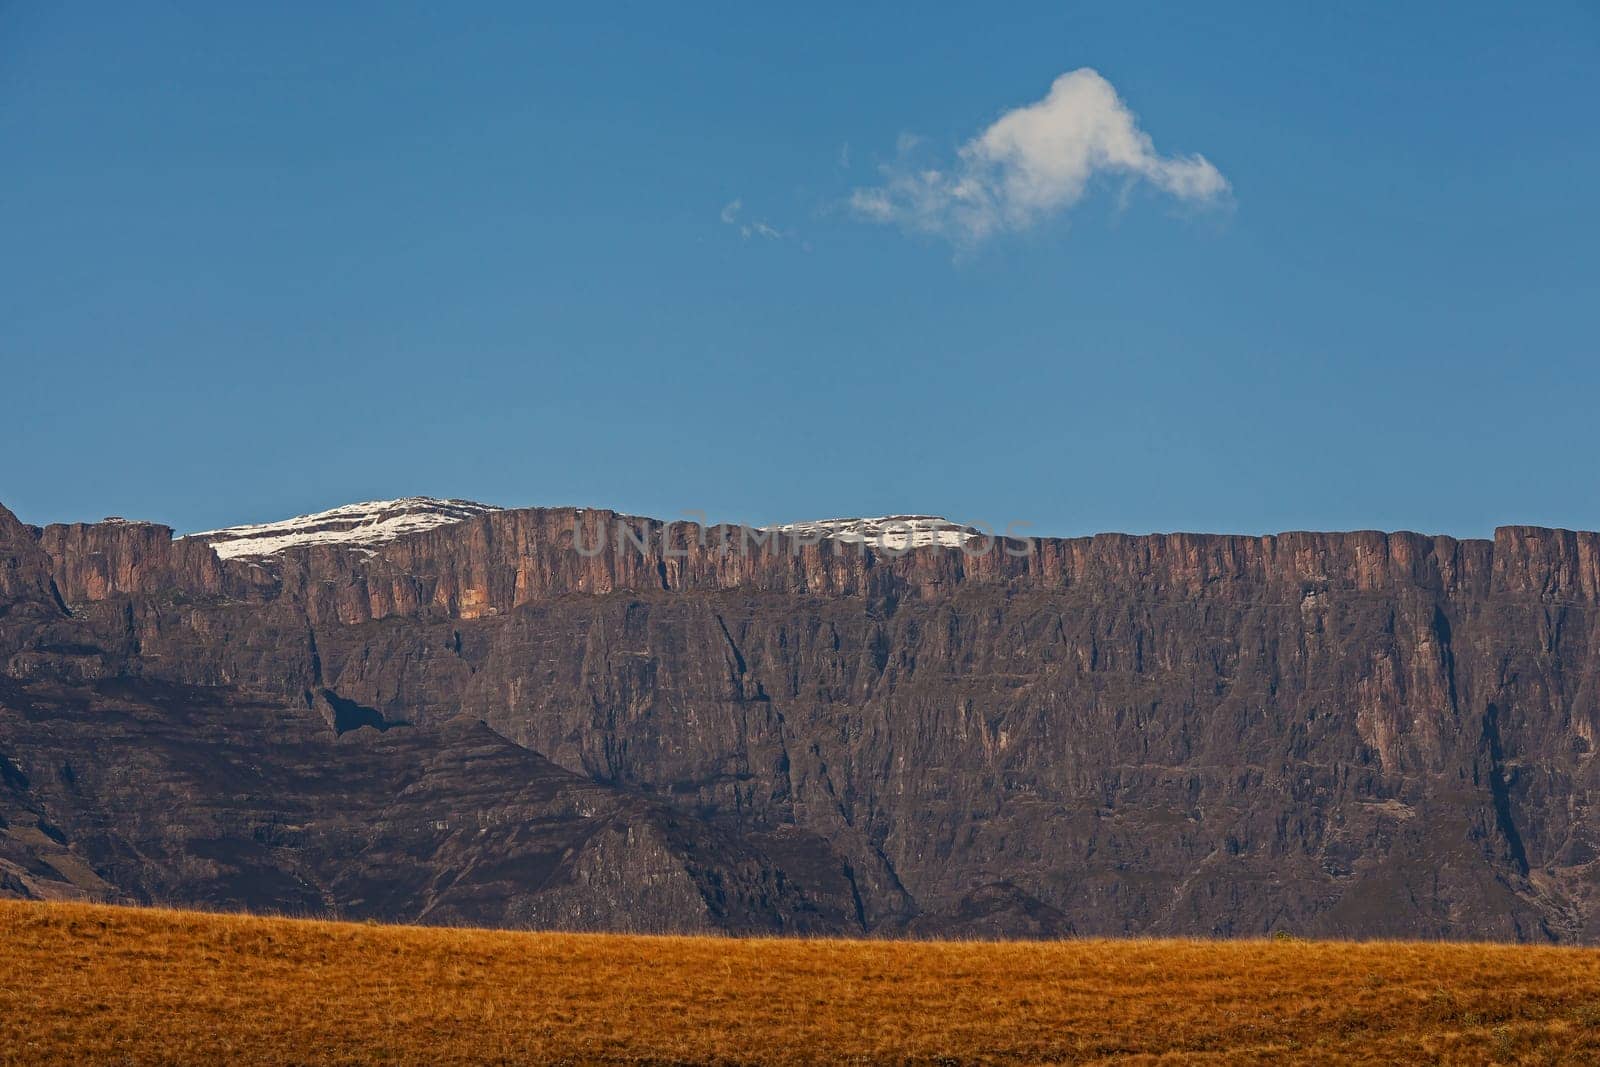 The Amphitheater formation with a light dusting of snow seen from the Royal Natal National Park in the Drakensberg South Africa